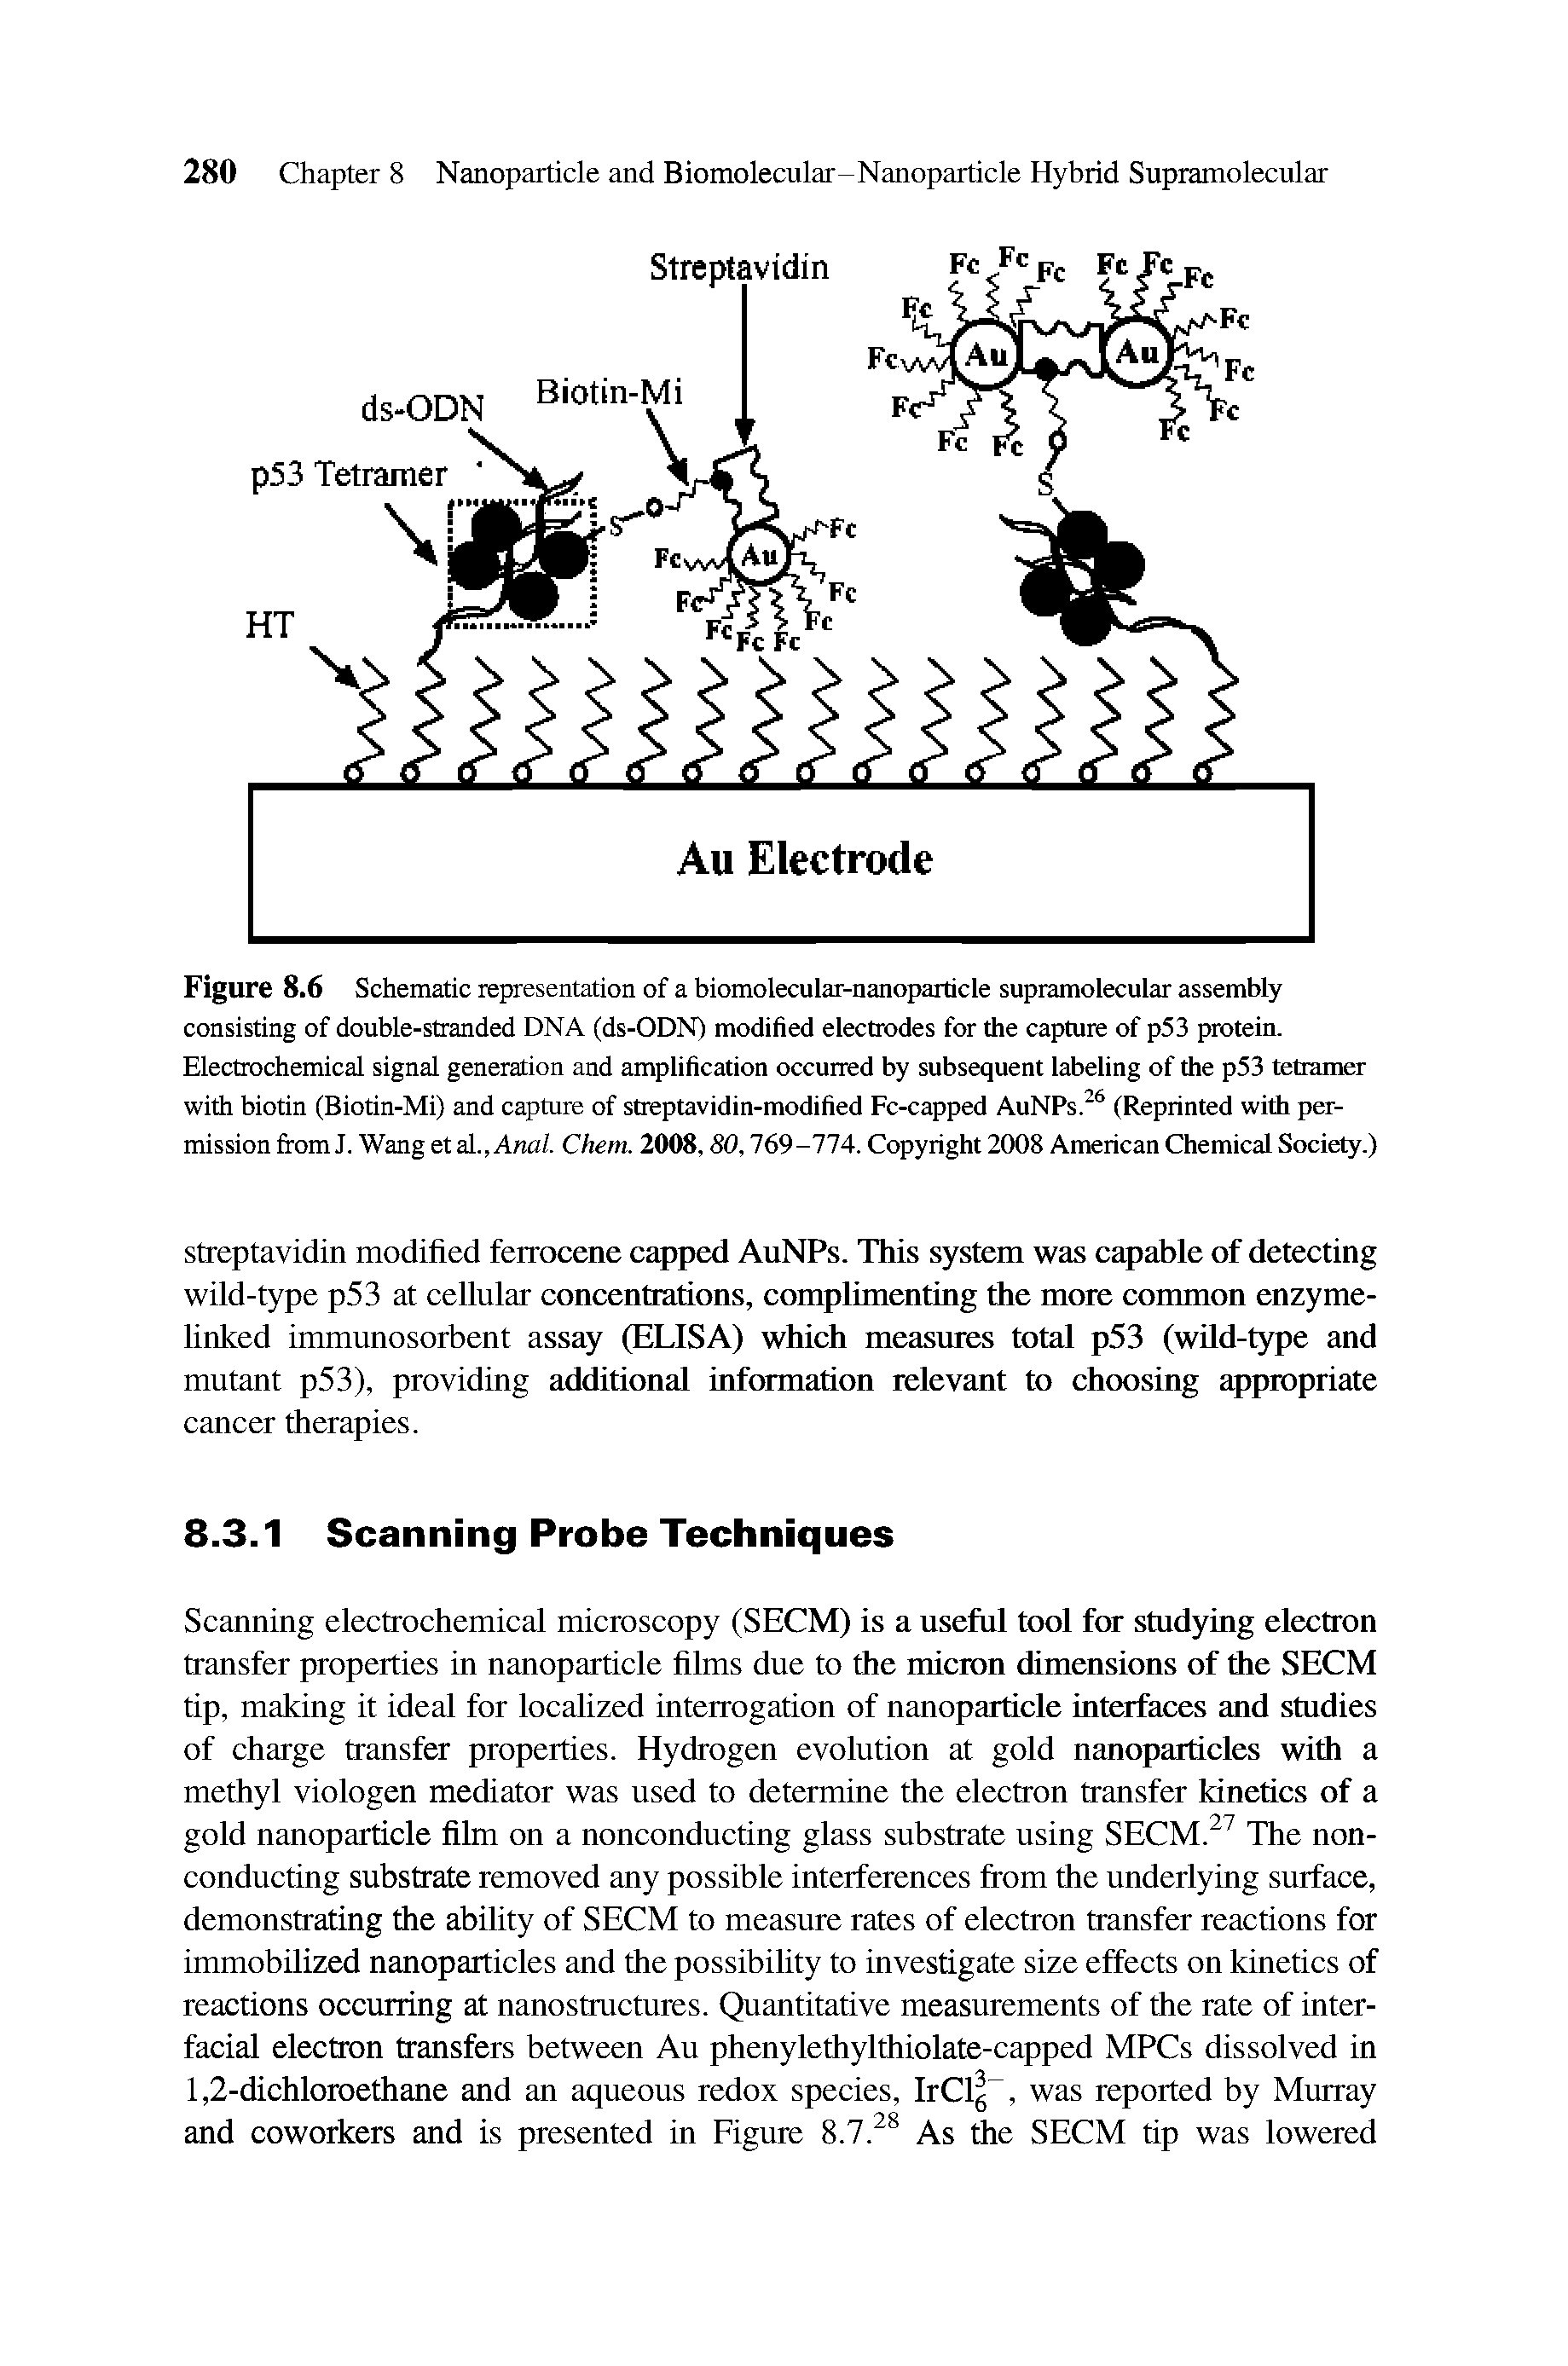 Figure 8.6 Schematic representation of a biomolecular-nanoparticle supramolecular assembly consisting of double-stranded DNA (ds-ODN) modified electrodes for the capture of p53 protein. Electrochemical signal generation and amplification occurred by subsequent labeling of the p53 tetramer with biotin (Biotin-Mi) and capture of streptavidin-modified Fc-capped AuNPs.26 (Reprinted with permission from J. Wang et al., Anal. Chem. 2008,80,769 -774. Copyright 2008 American Chemical Society.)...